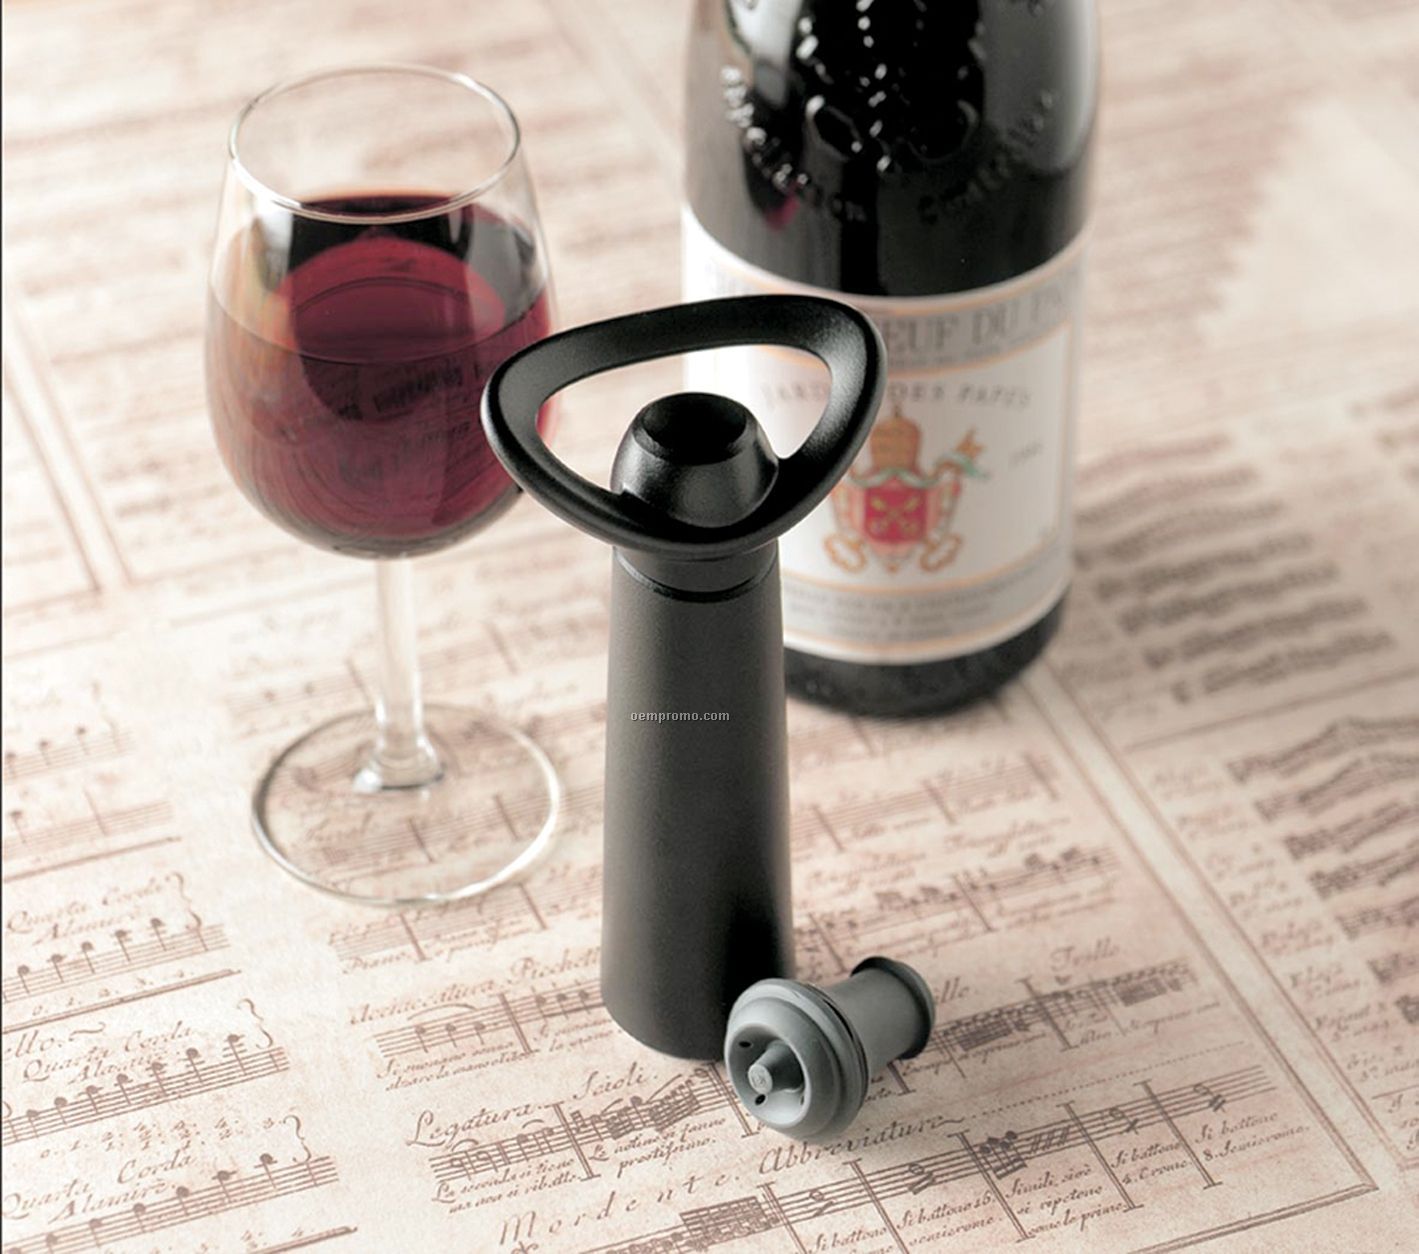 Concerto Wine Saver Kit With Vacuum Pump & Bottle Stopper